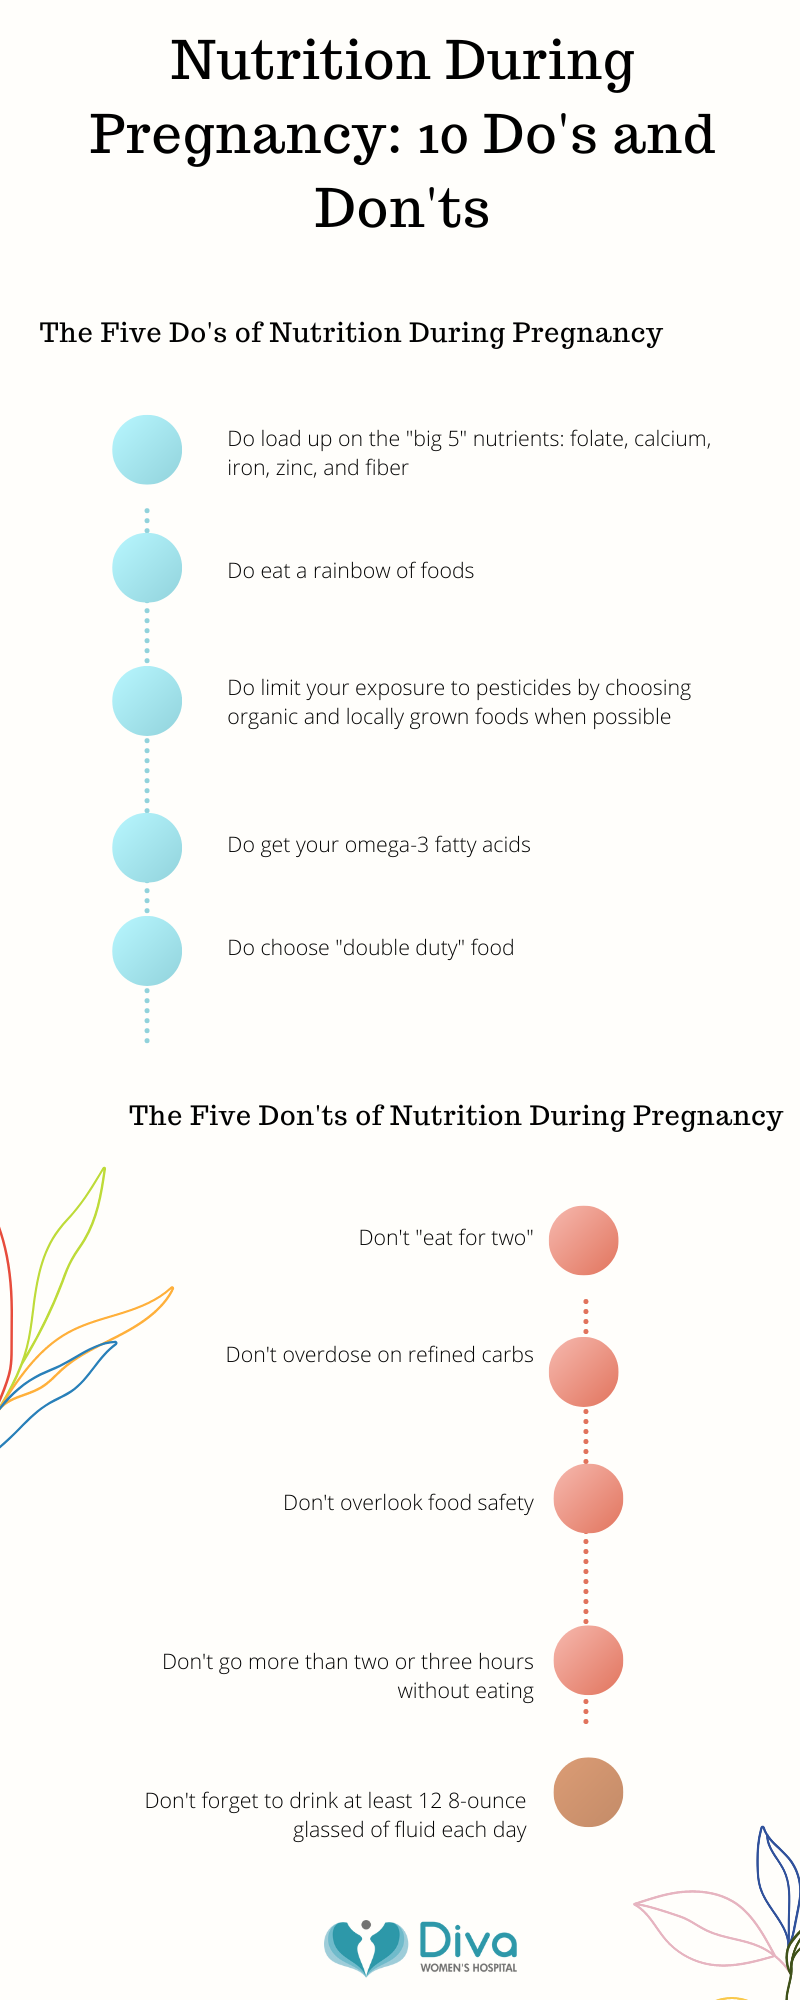 Nutrition During Pregnancy 10 Do's and Don'ts